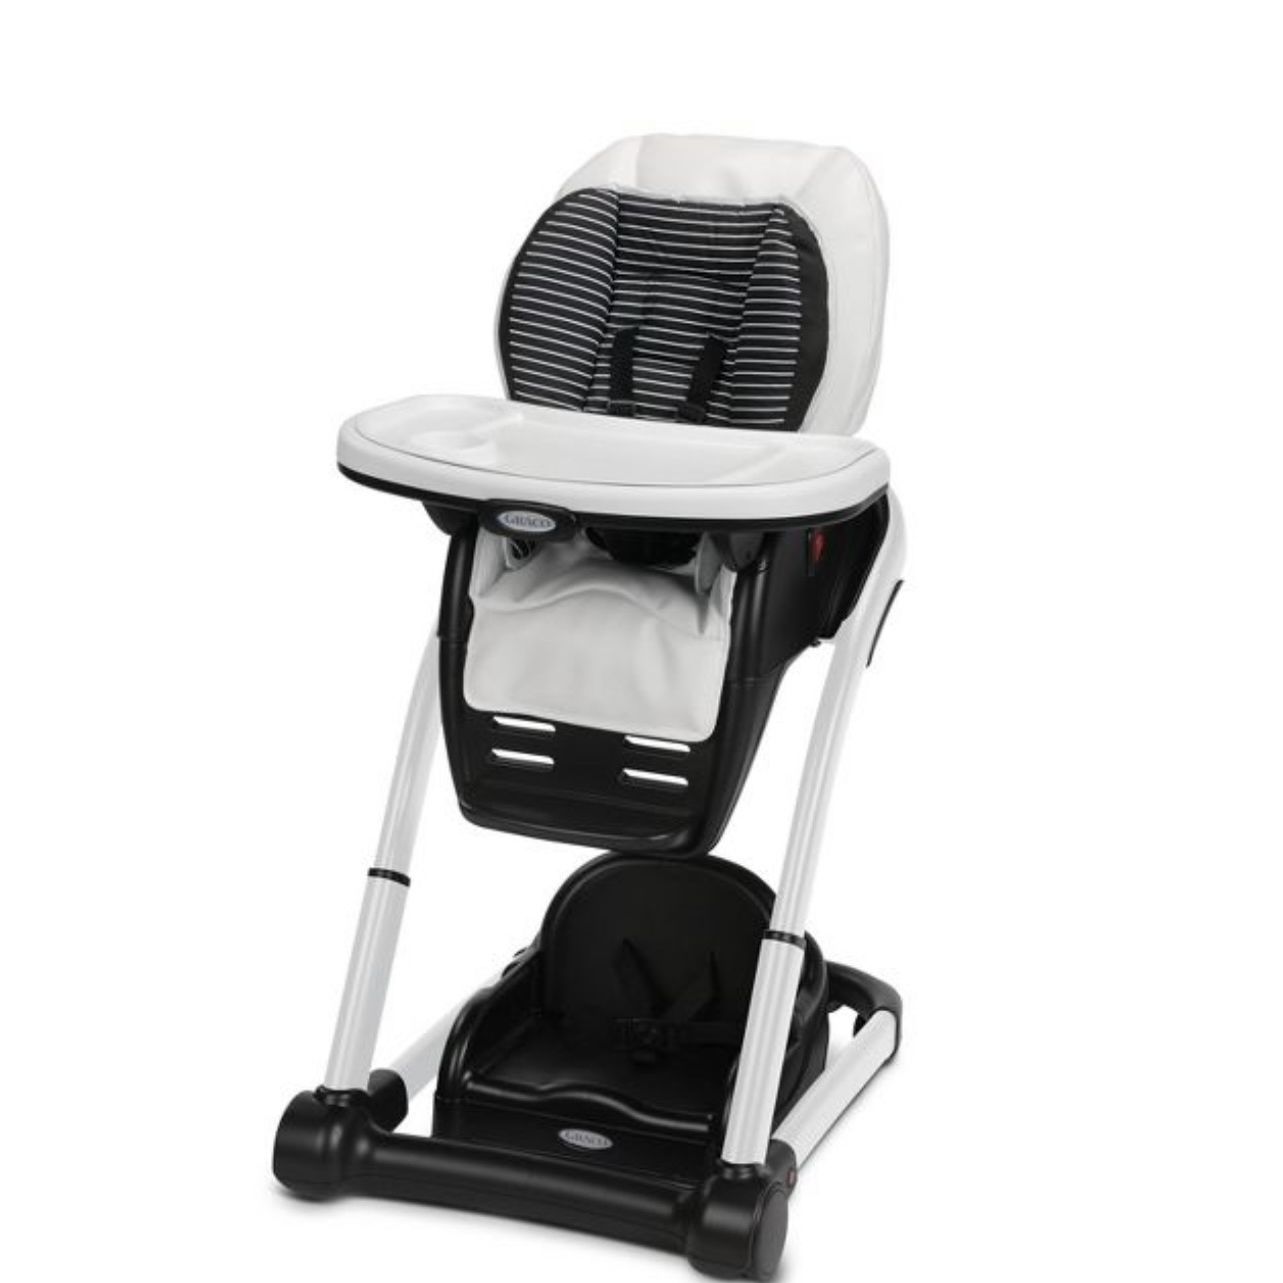 Graco Infant/Toddler Highchair 